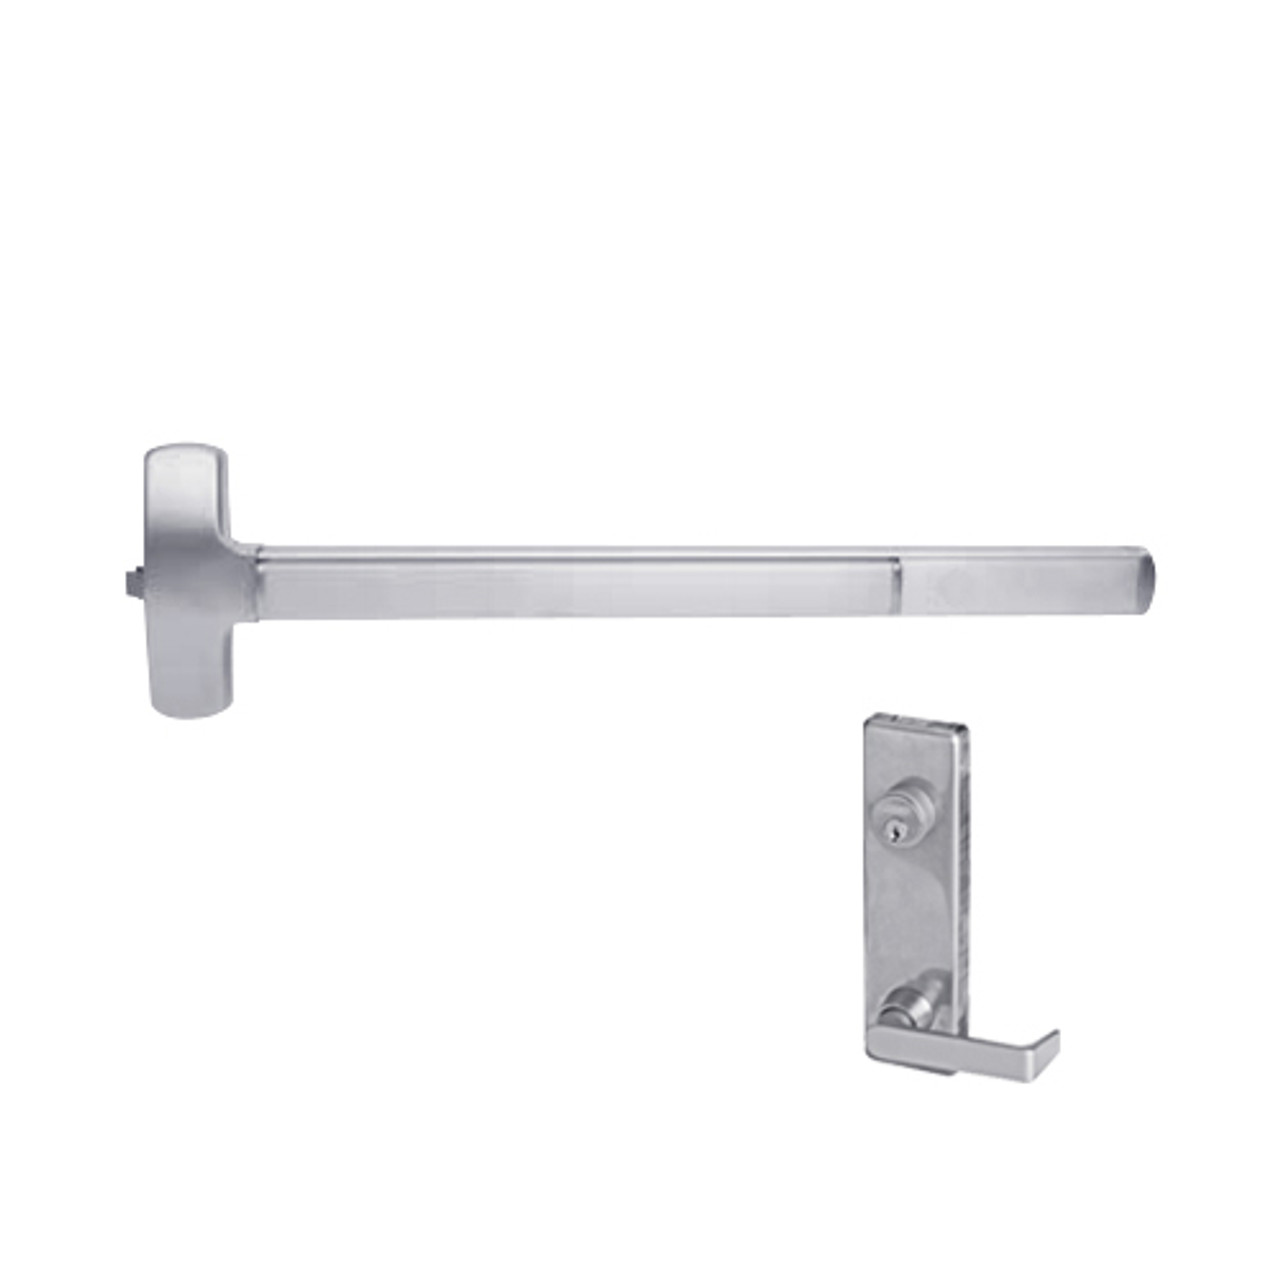 F-25-R-L-DANE-US32-4-RHR Falcon Exit Device in Polished Stainless Steel